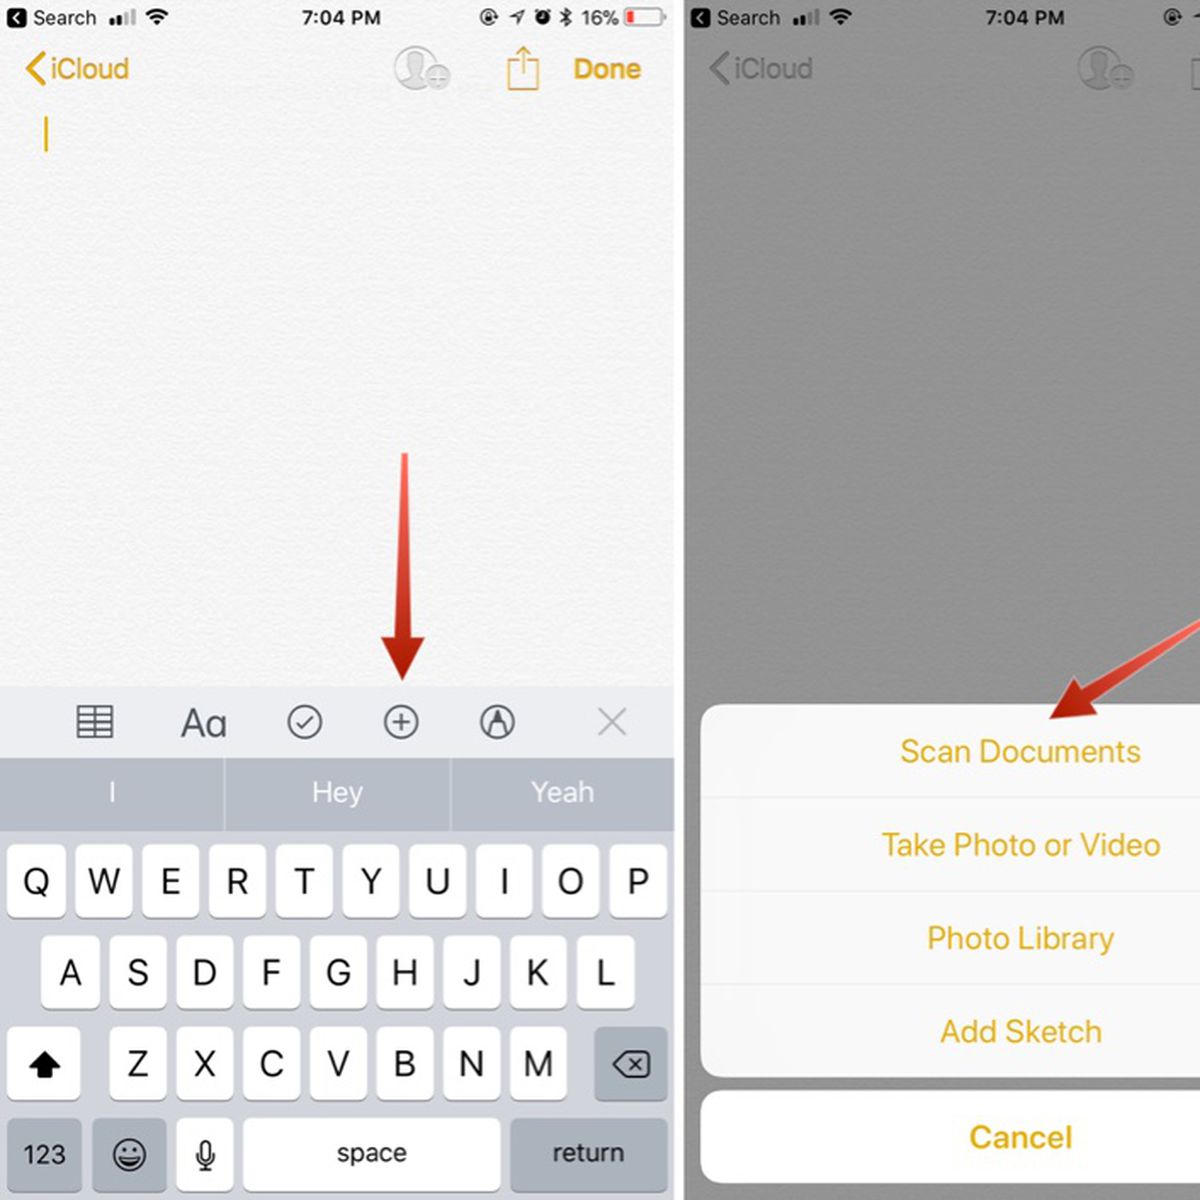 Provisional Converge feel How to Use the New iOS 11 Document Scanner in Notes on iPad and iPhone -  MacRumors